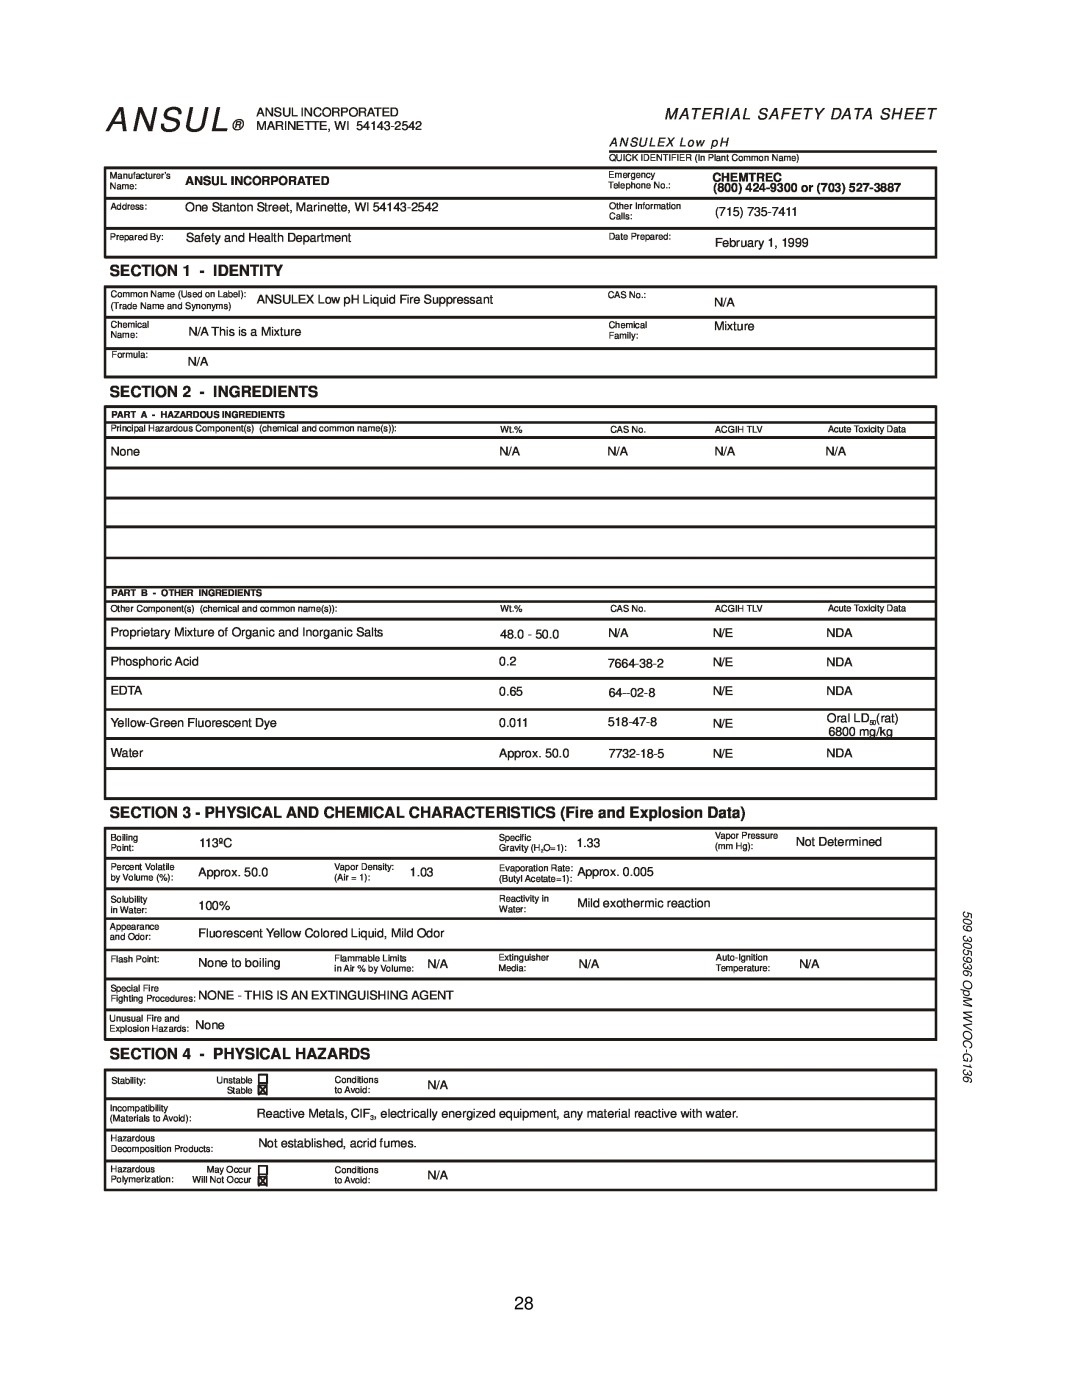 Bloomfield WVOC-G136 Ansul, Material Safety Data Sheet, Identity, Ingredients, Physical Hazards, ANSULEX Low pH, Chemtrec 